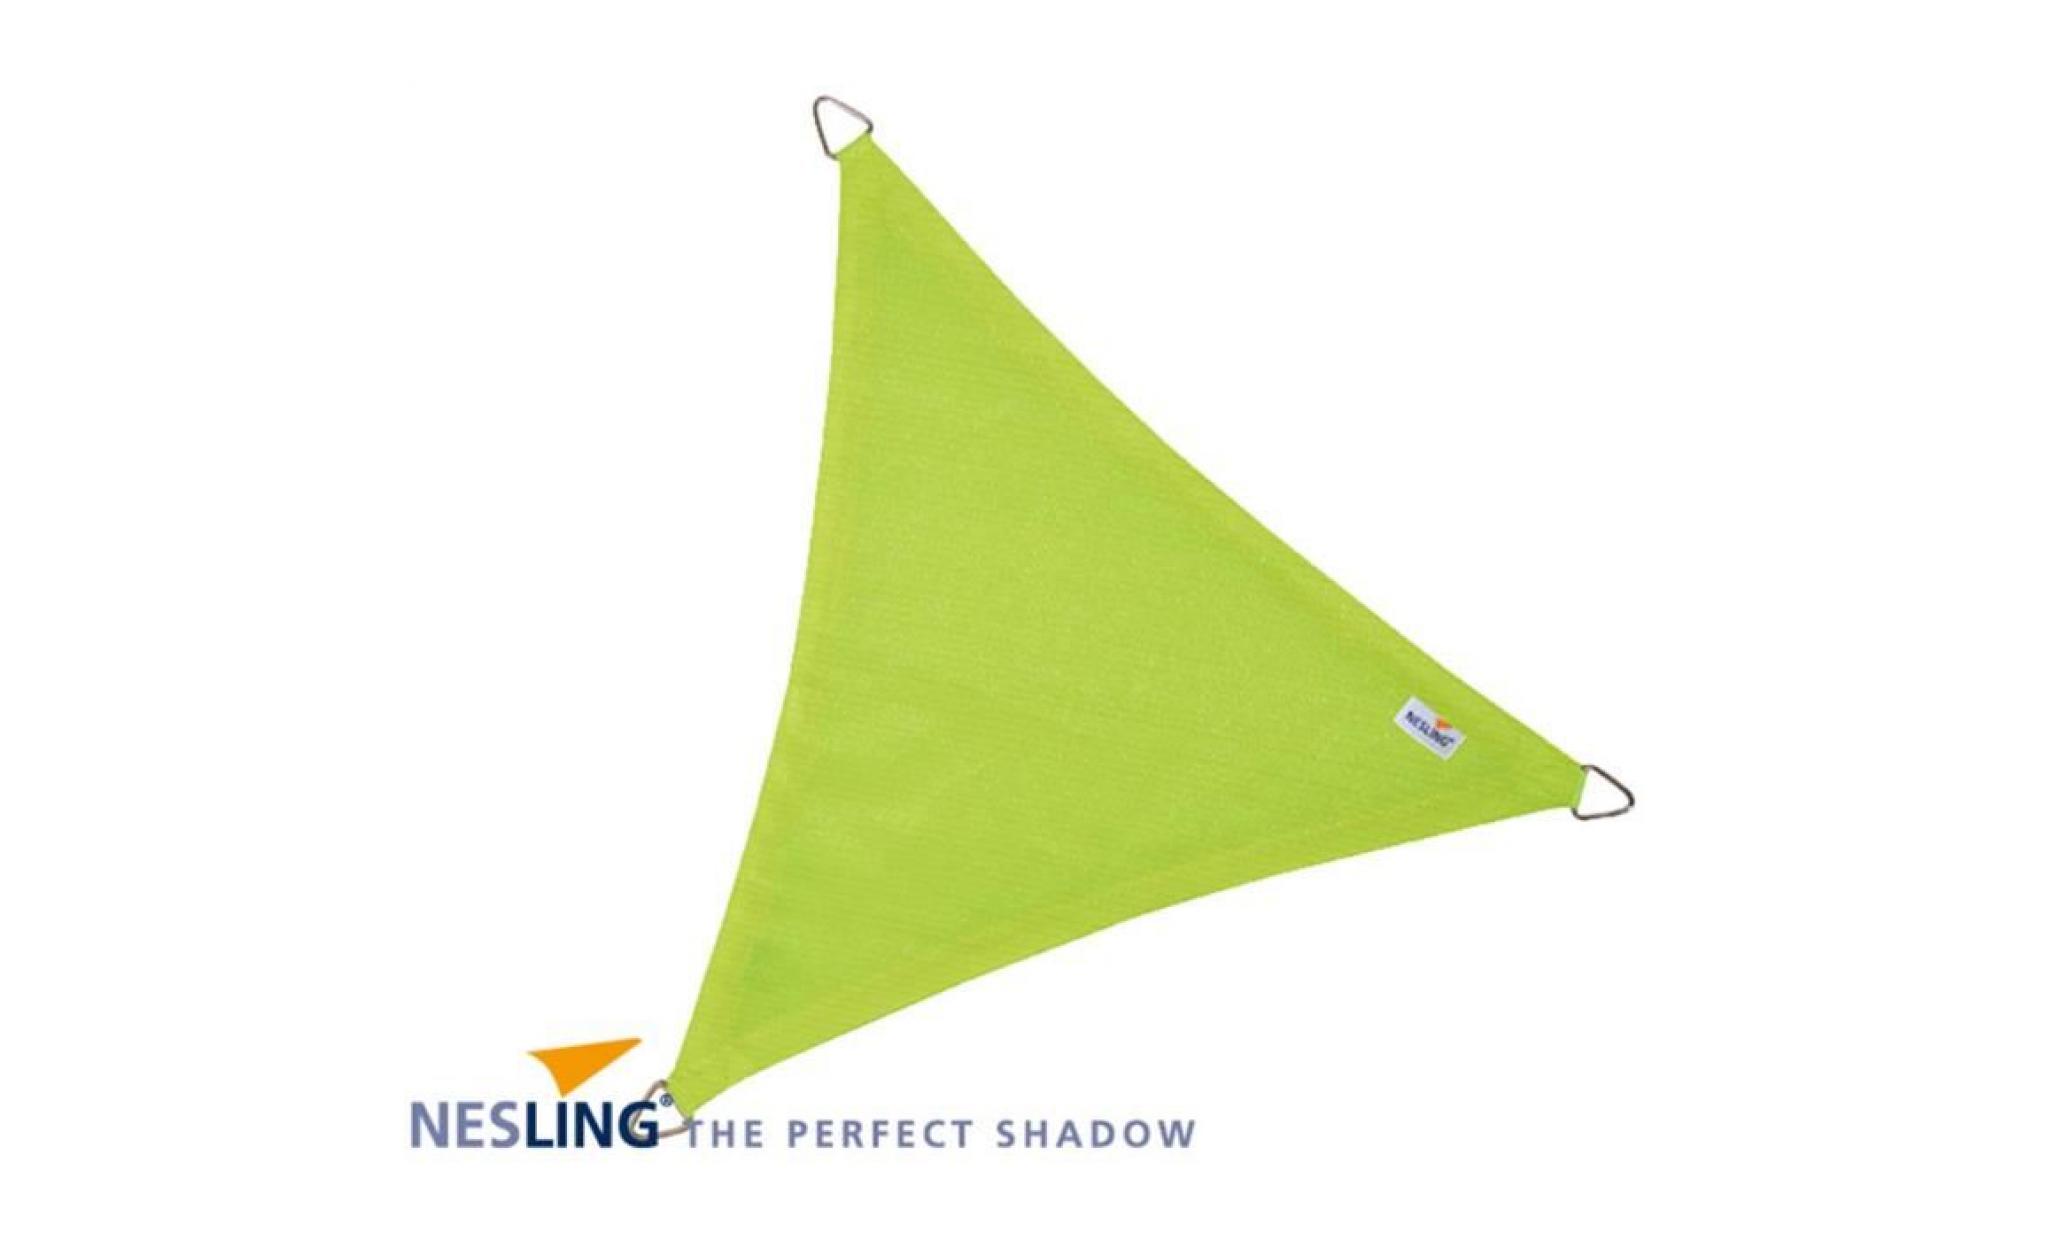 voile d'ombrage triangulaire coolfit vert lime 3,6 x 3,6 x 3,6 m vert